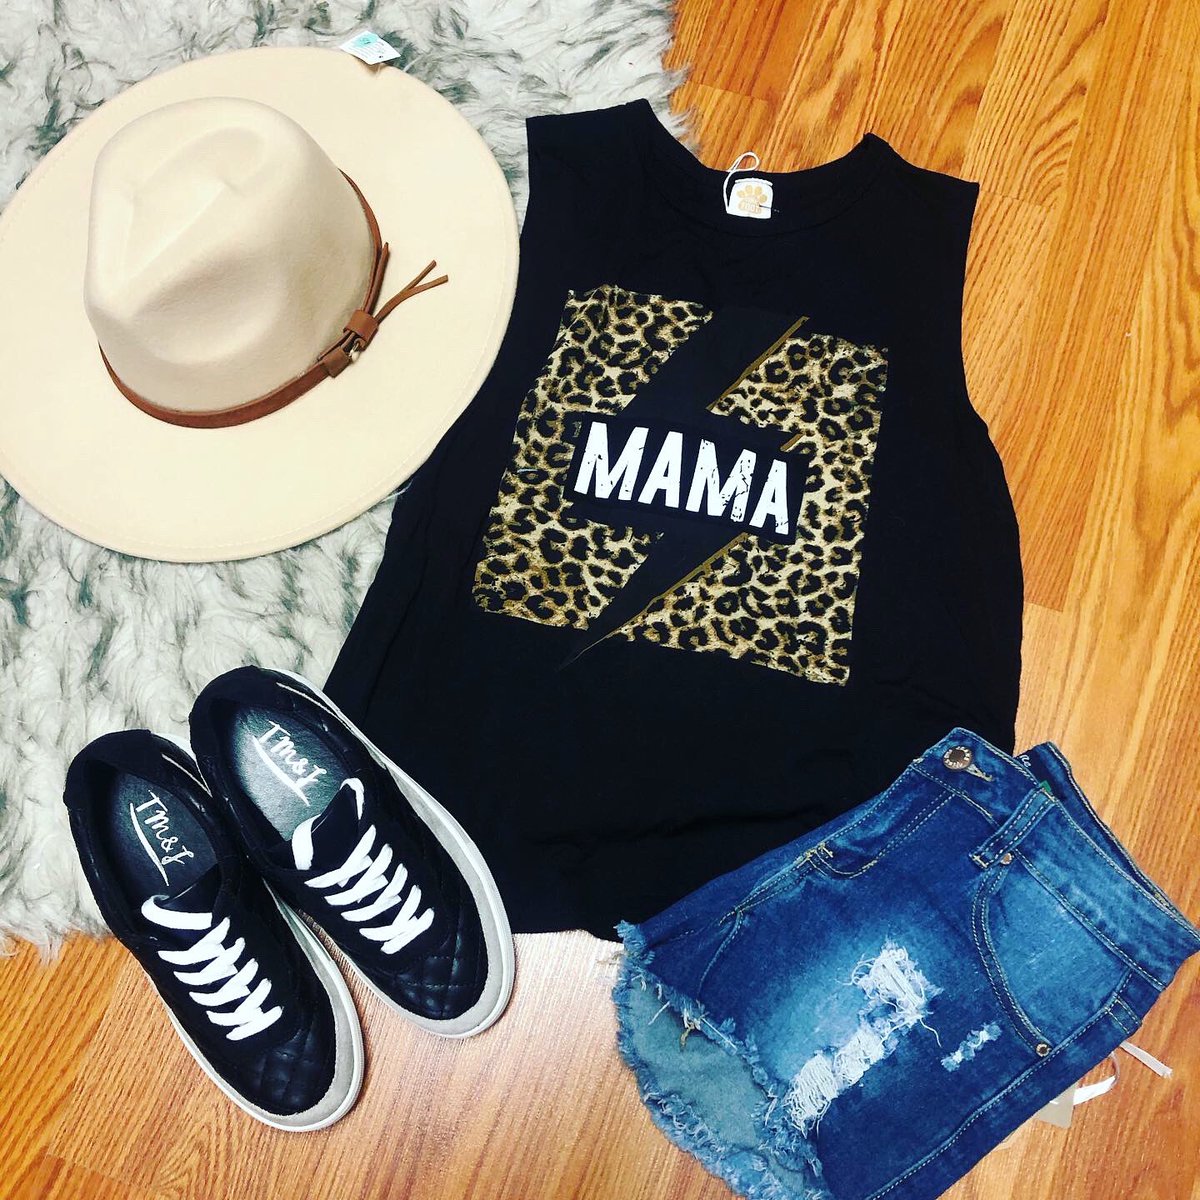 Mama⚡️tank! Get it now at sugarbabesboutique.net 

#shopSBB #shopboutiques #shopnow #localboutique #girlswithstyle #boutiquestyle #pittsboro #inhendricks #shopindy #musthave #boutiqueshopping #indyboutiques #mama #mothersday #momlife #momboss